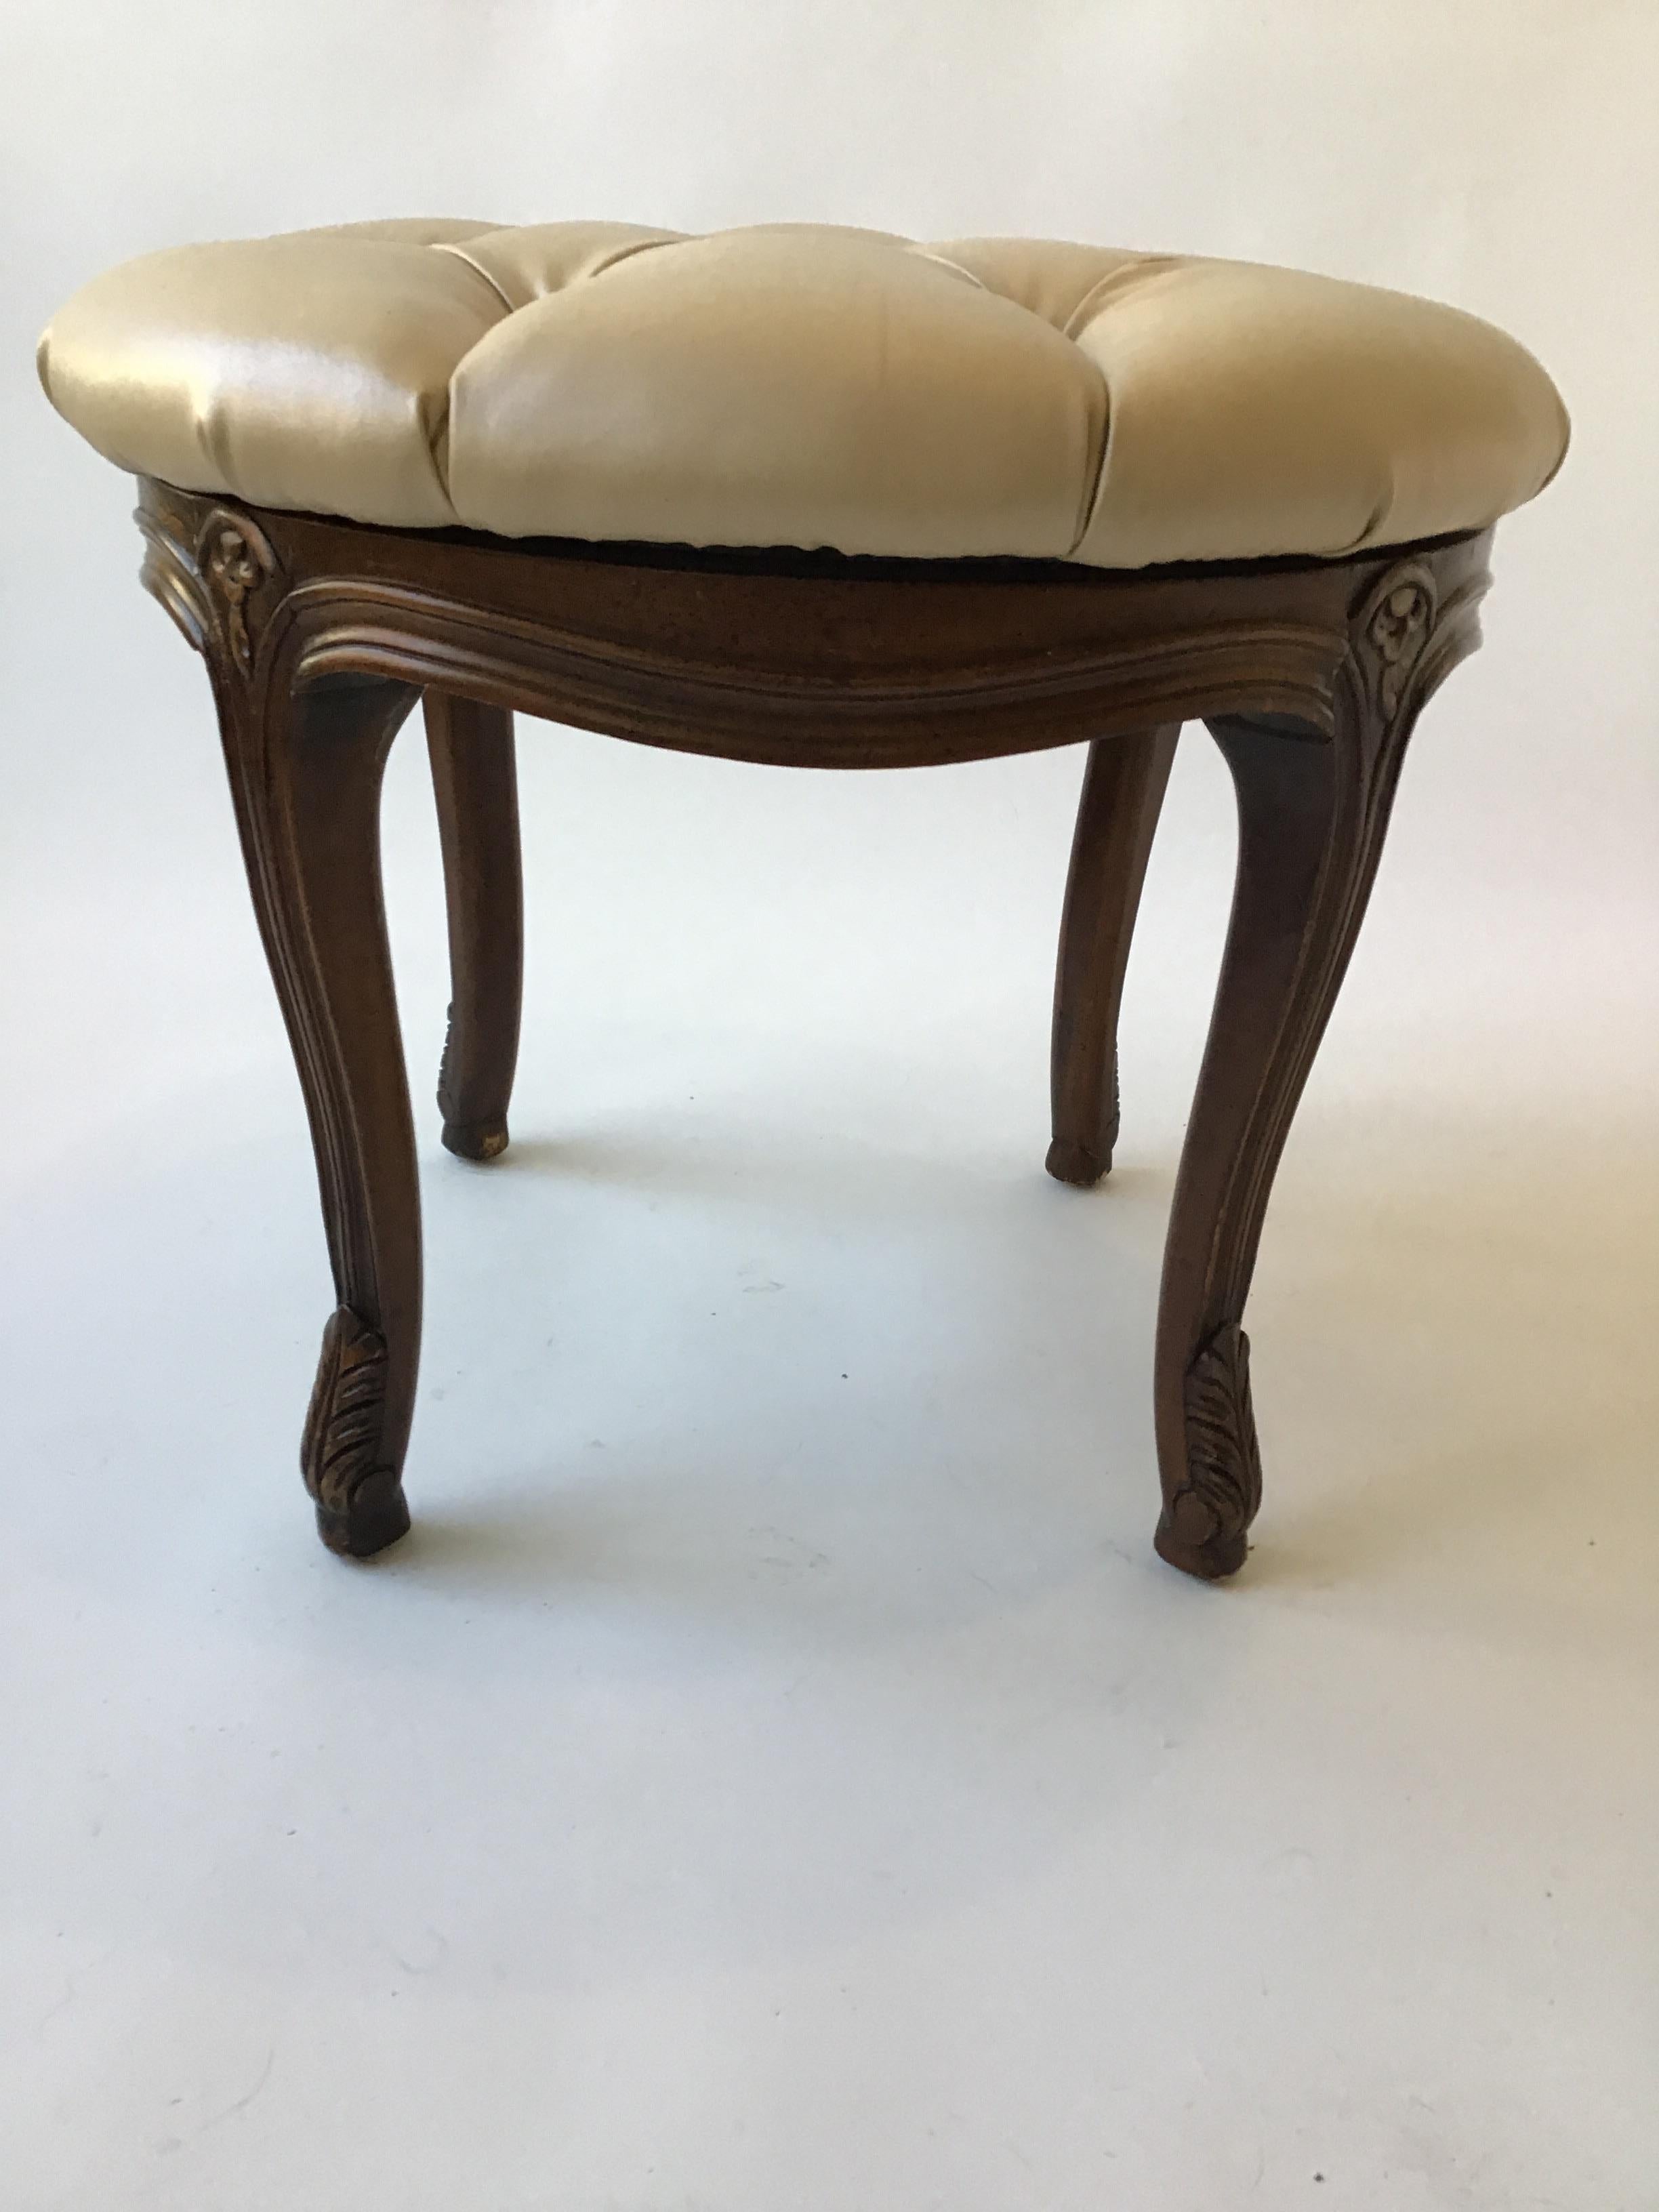 French style carved wood ottoman with revolving seat. Original vinyl fabric.